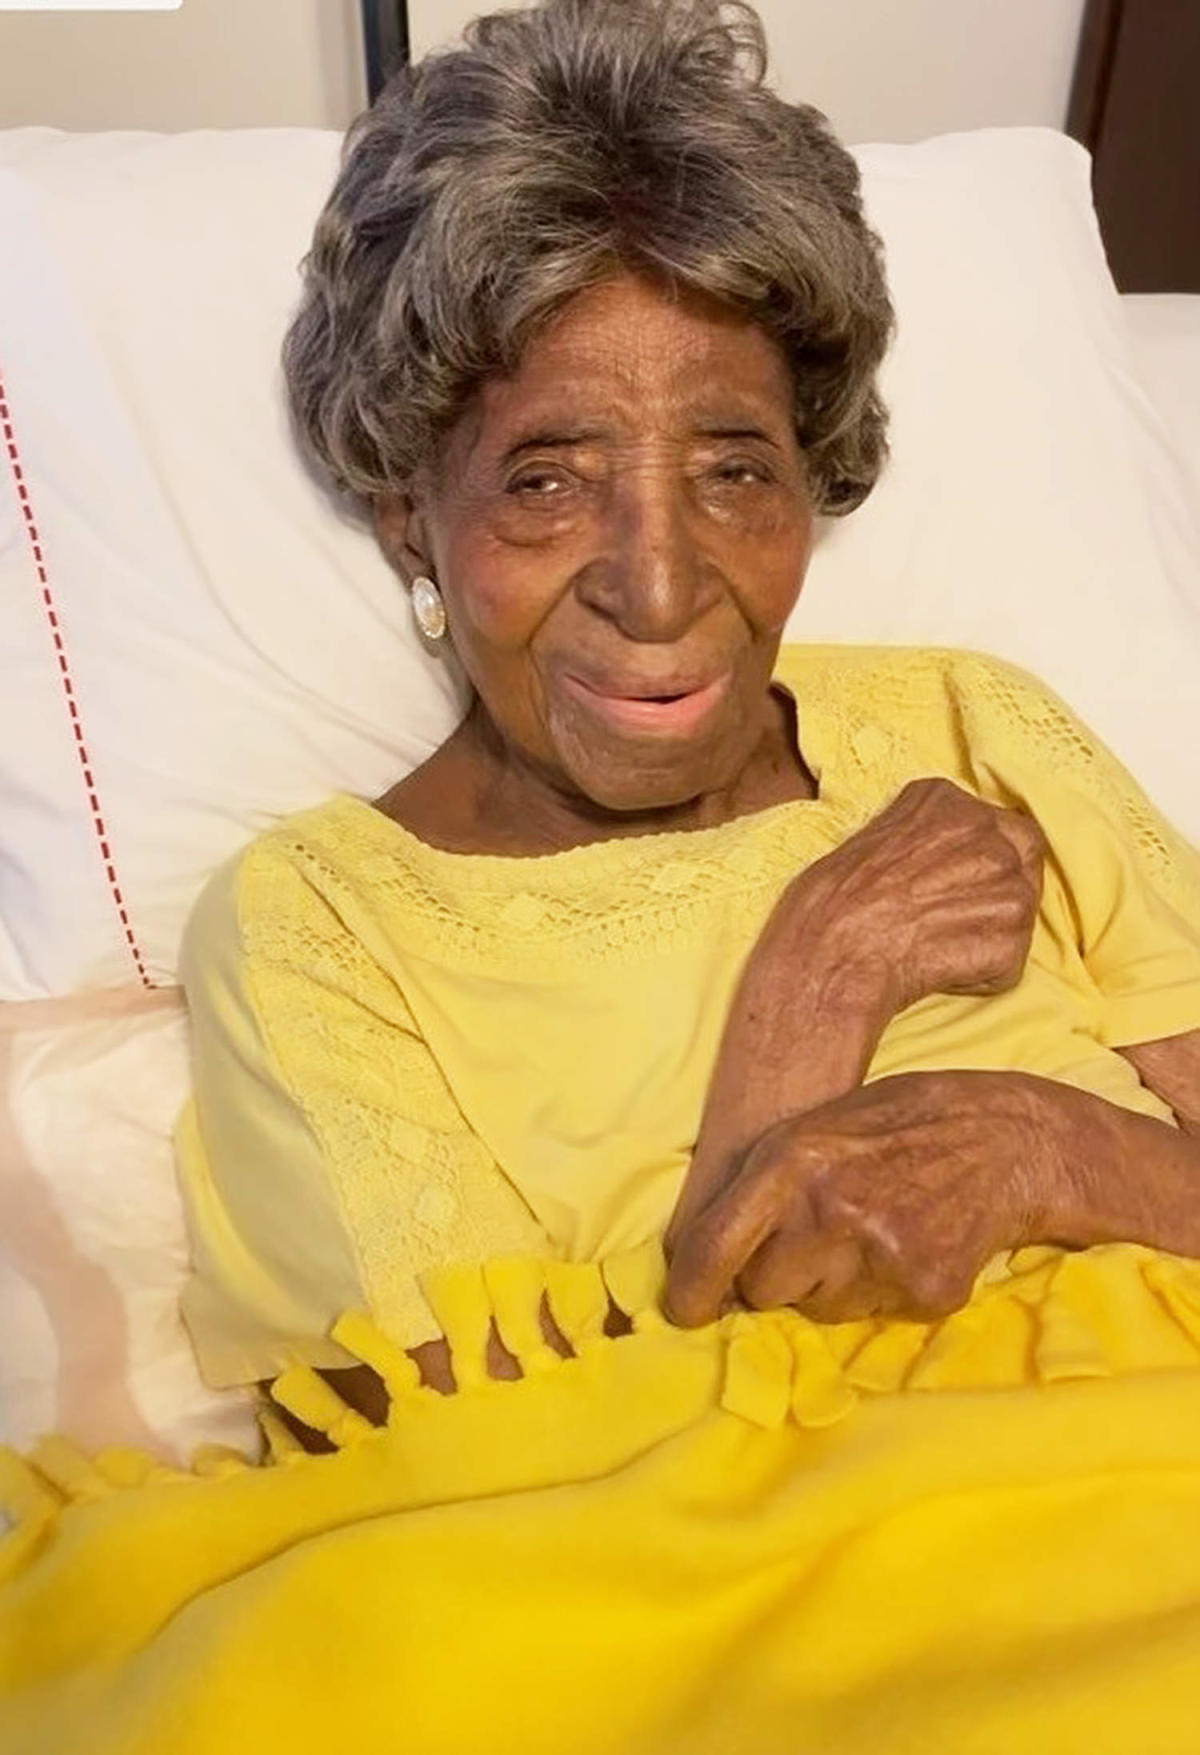 America's oldest living person, at 114, may also be the fiftholdest